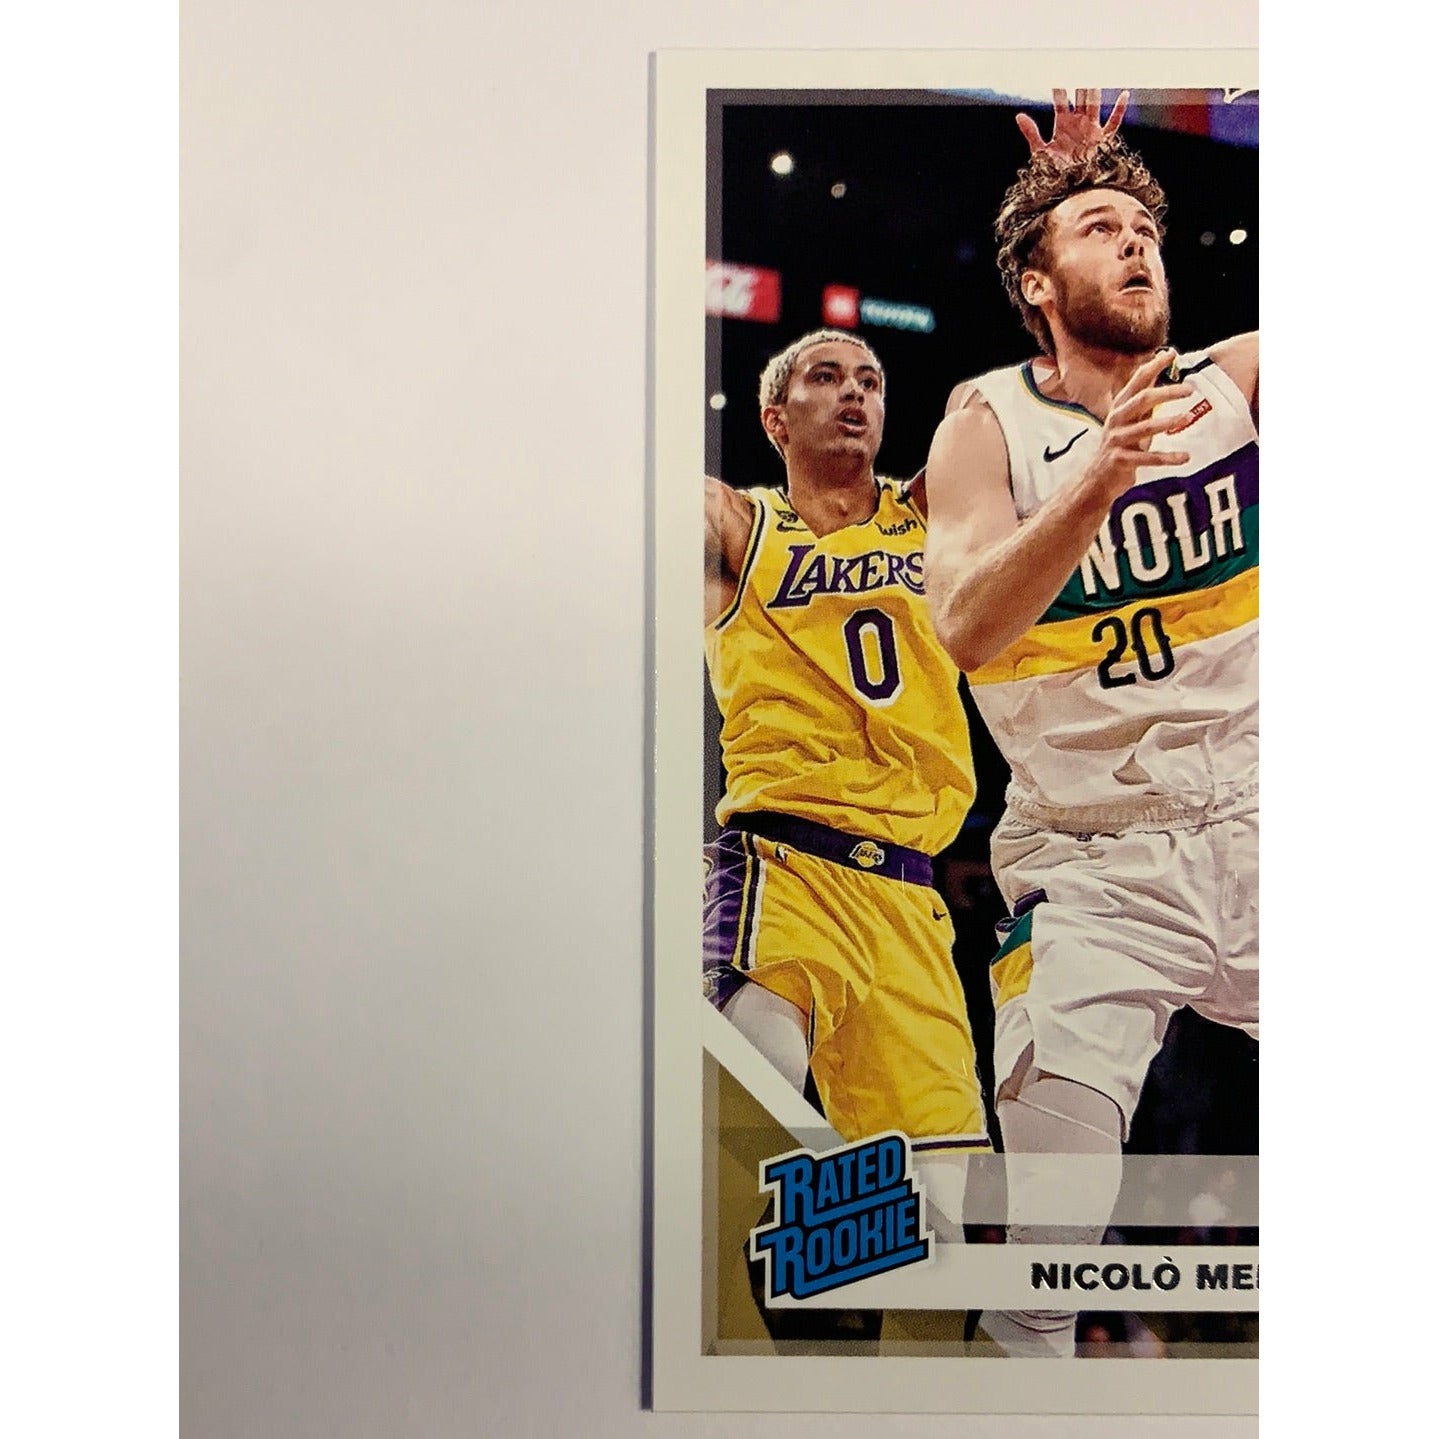 2019-20 Donruss Nicolo Melli Rated Rookie